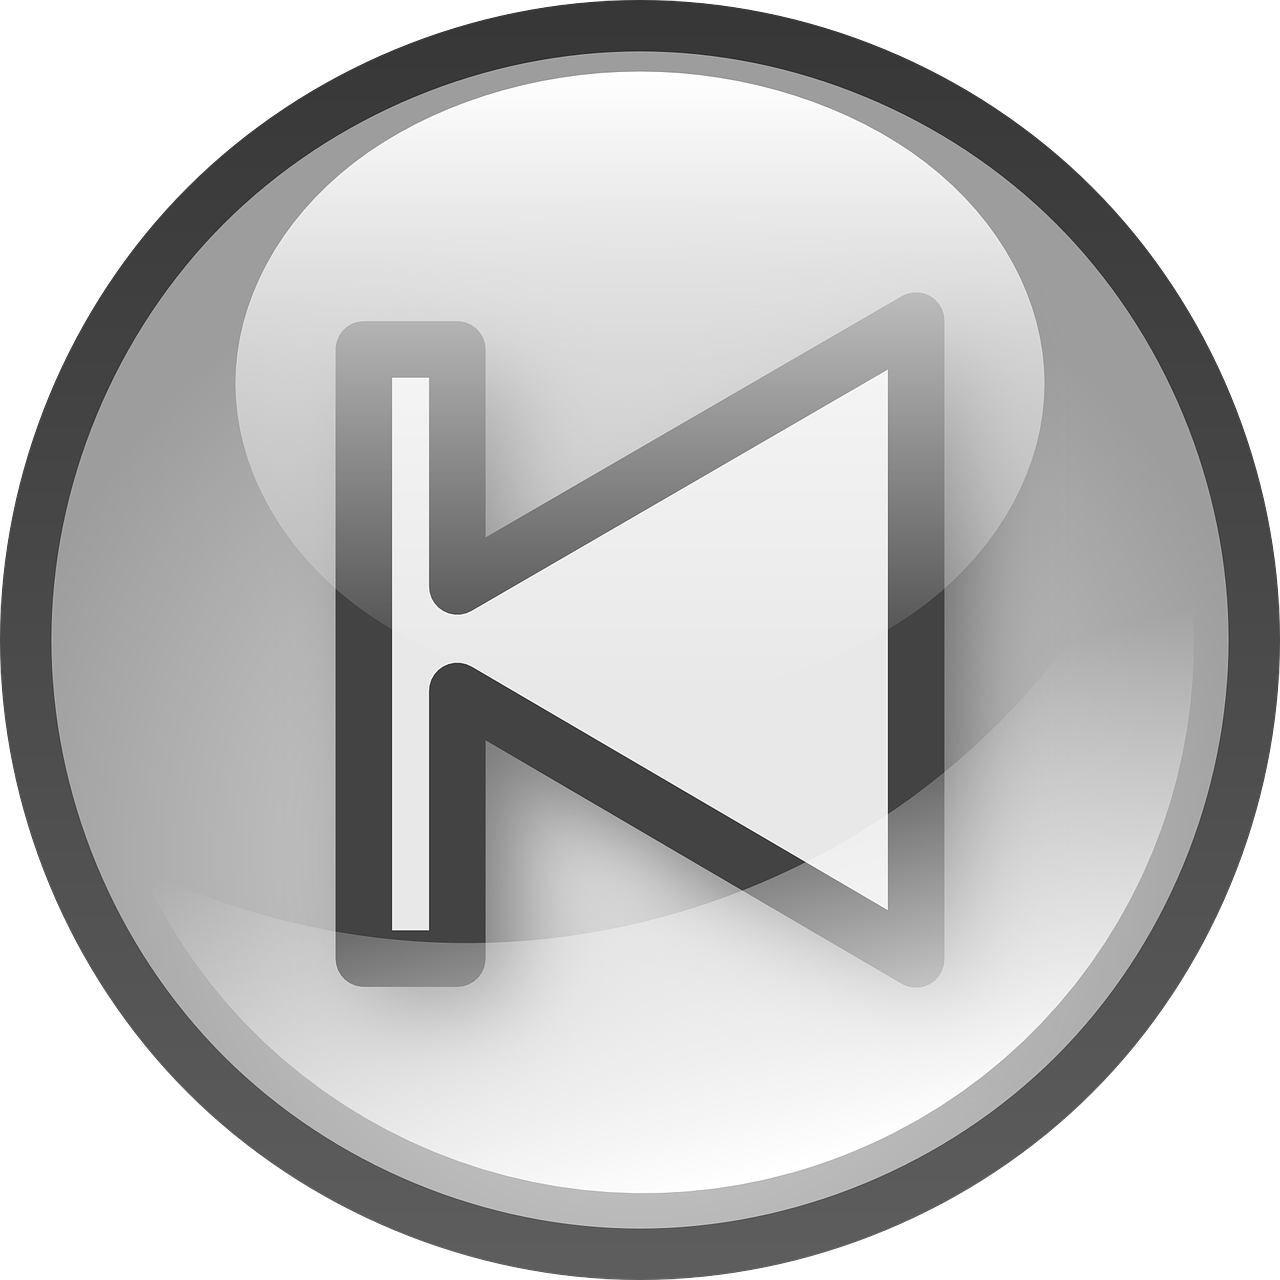 Previous Button PNG Image File